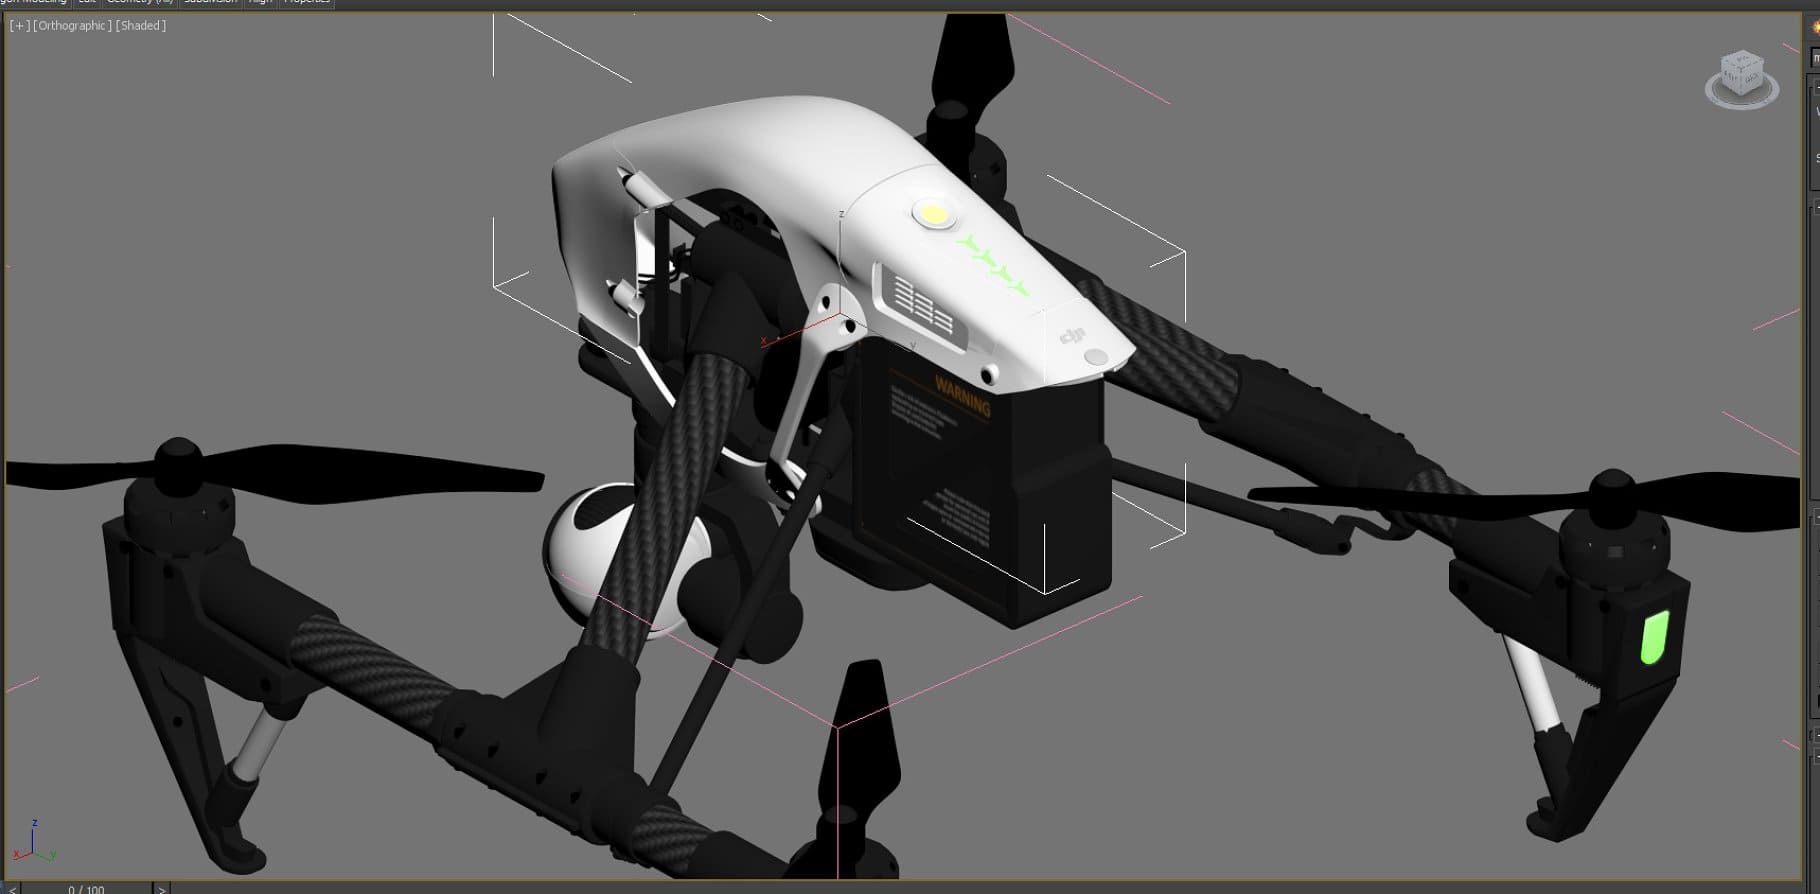 Quadcopter with high-quality elements for perfect operation of the device.